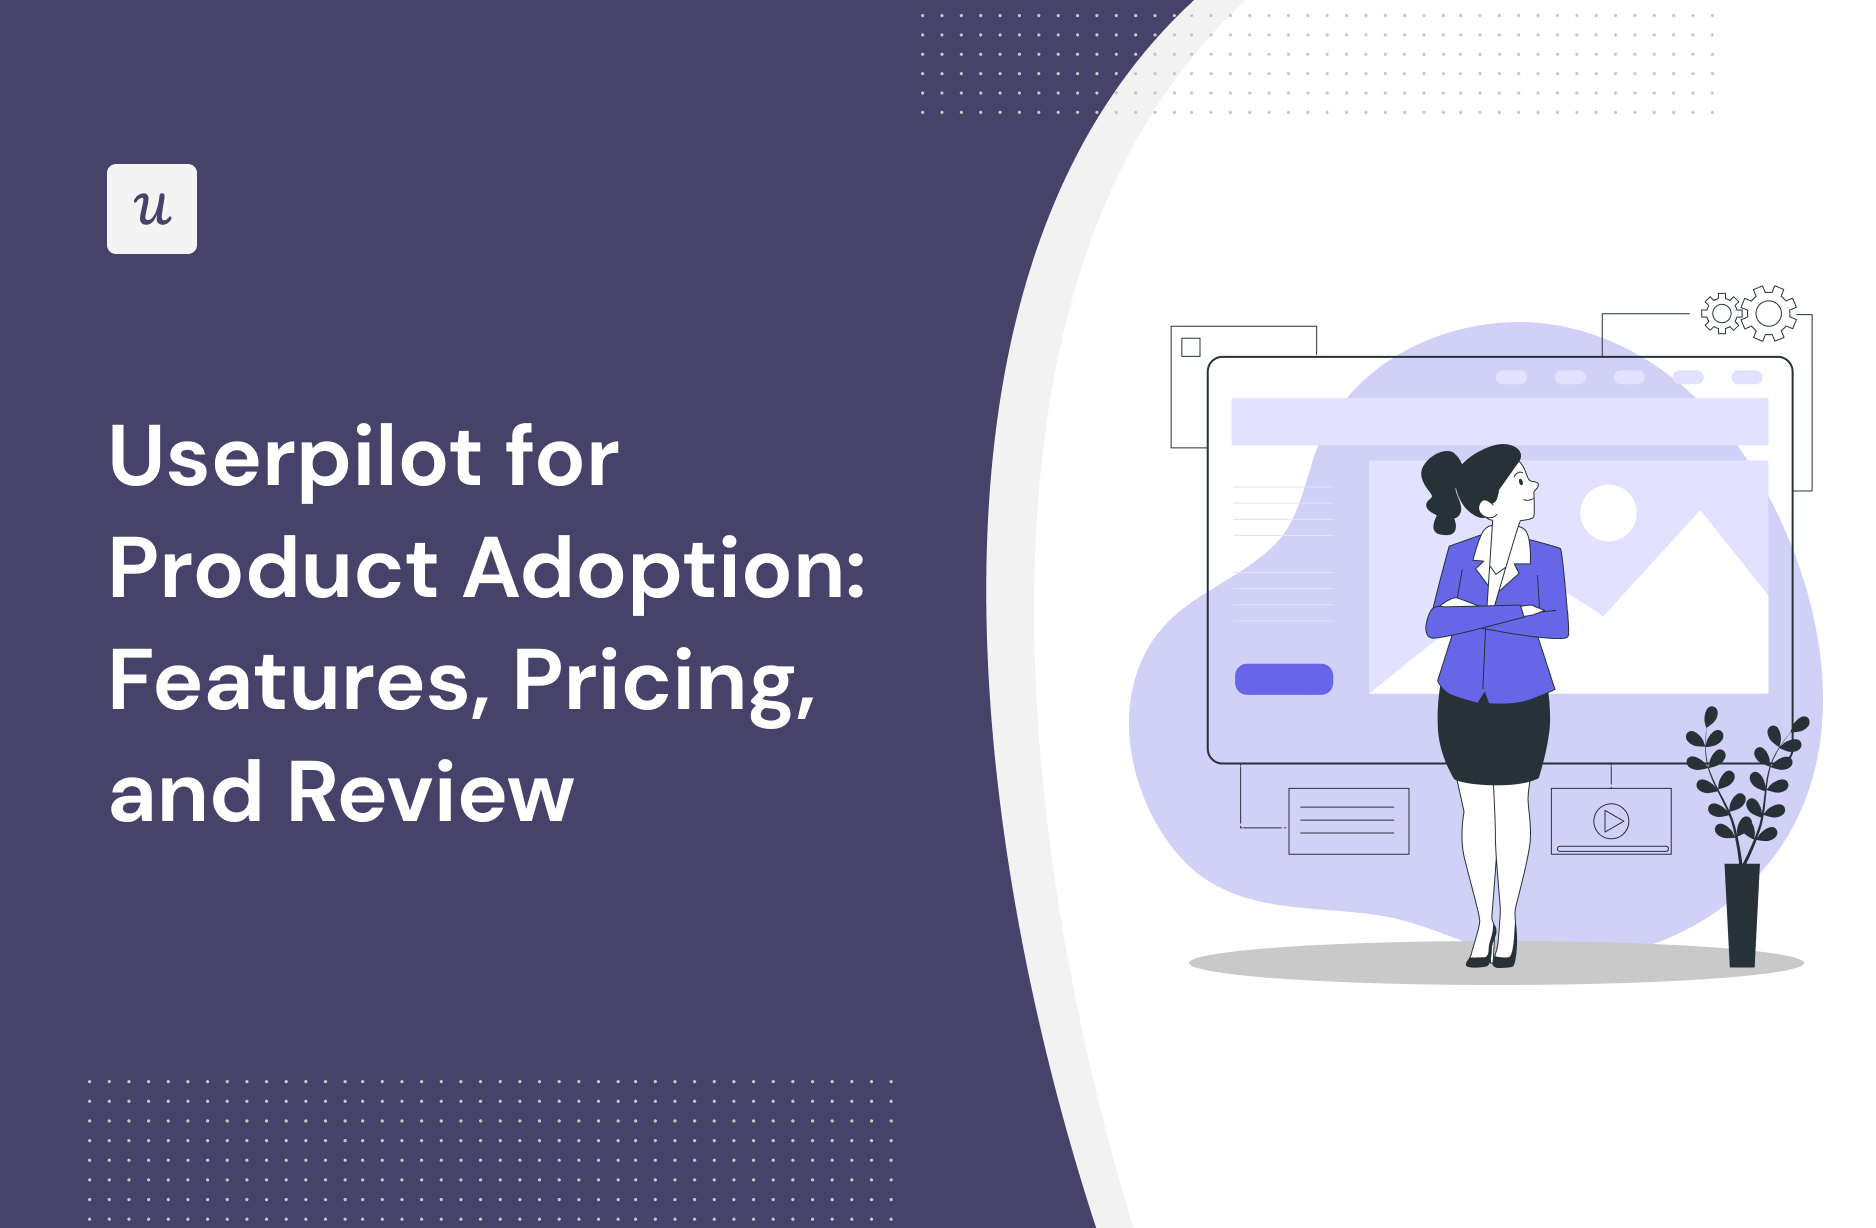 Userpilot for Product Adoption: Features, Pricing, and Review